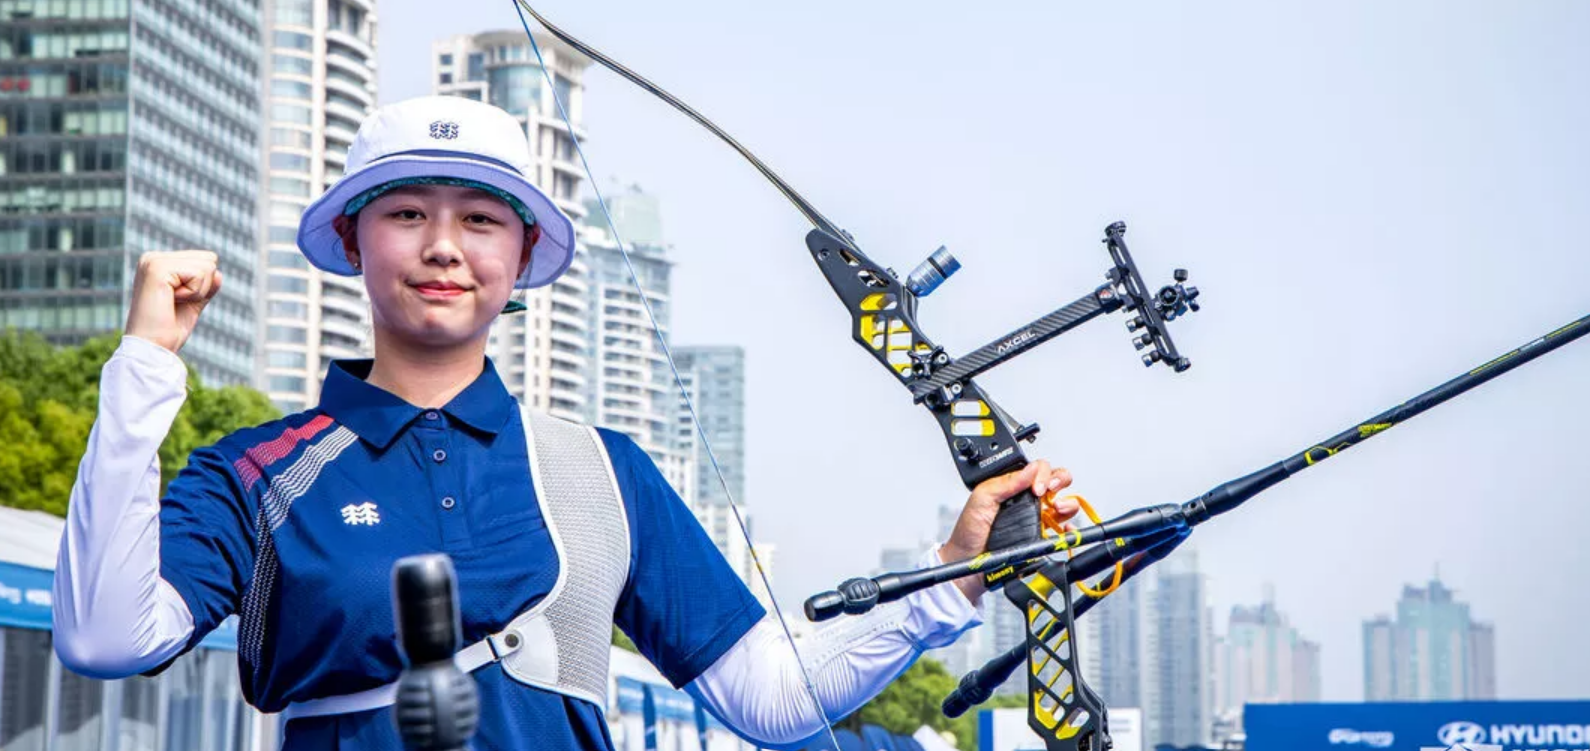 Nineteen-year-old Lim Sihyeon beat three South Korean compatriots with five Olympic titles between them to win the recurve women's event at the Shanghai Archery World Cup ©World Archery